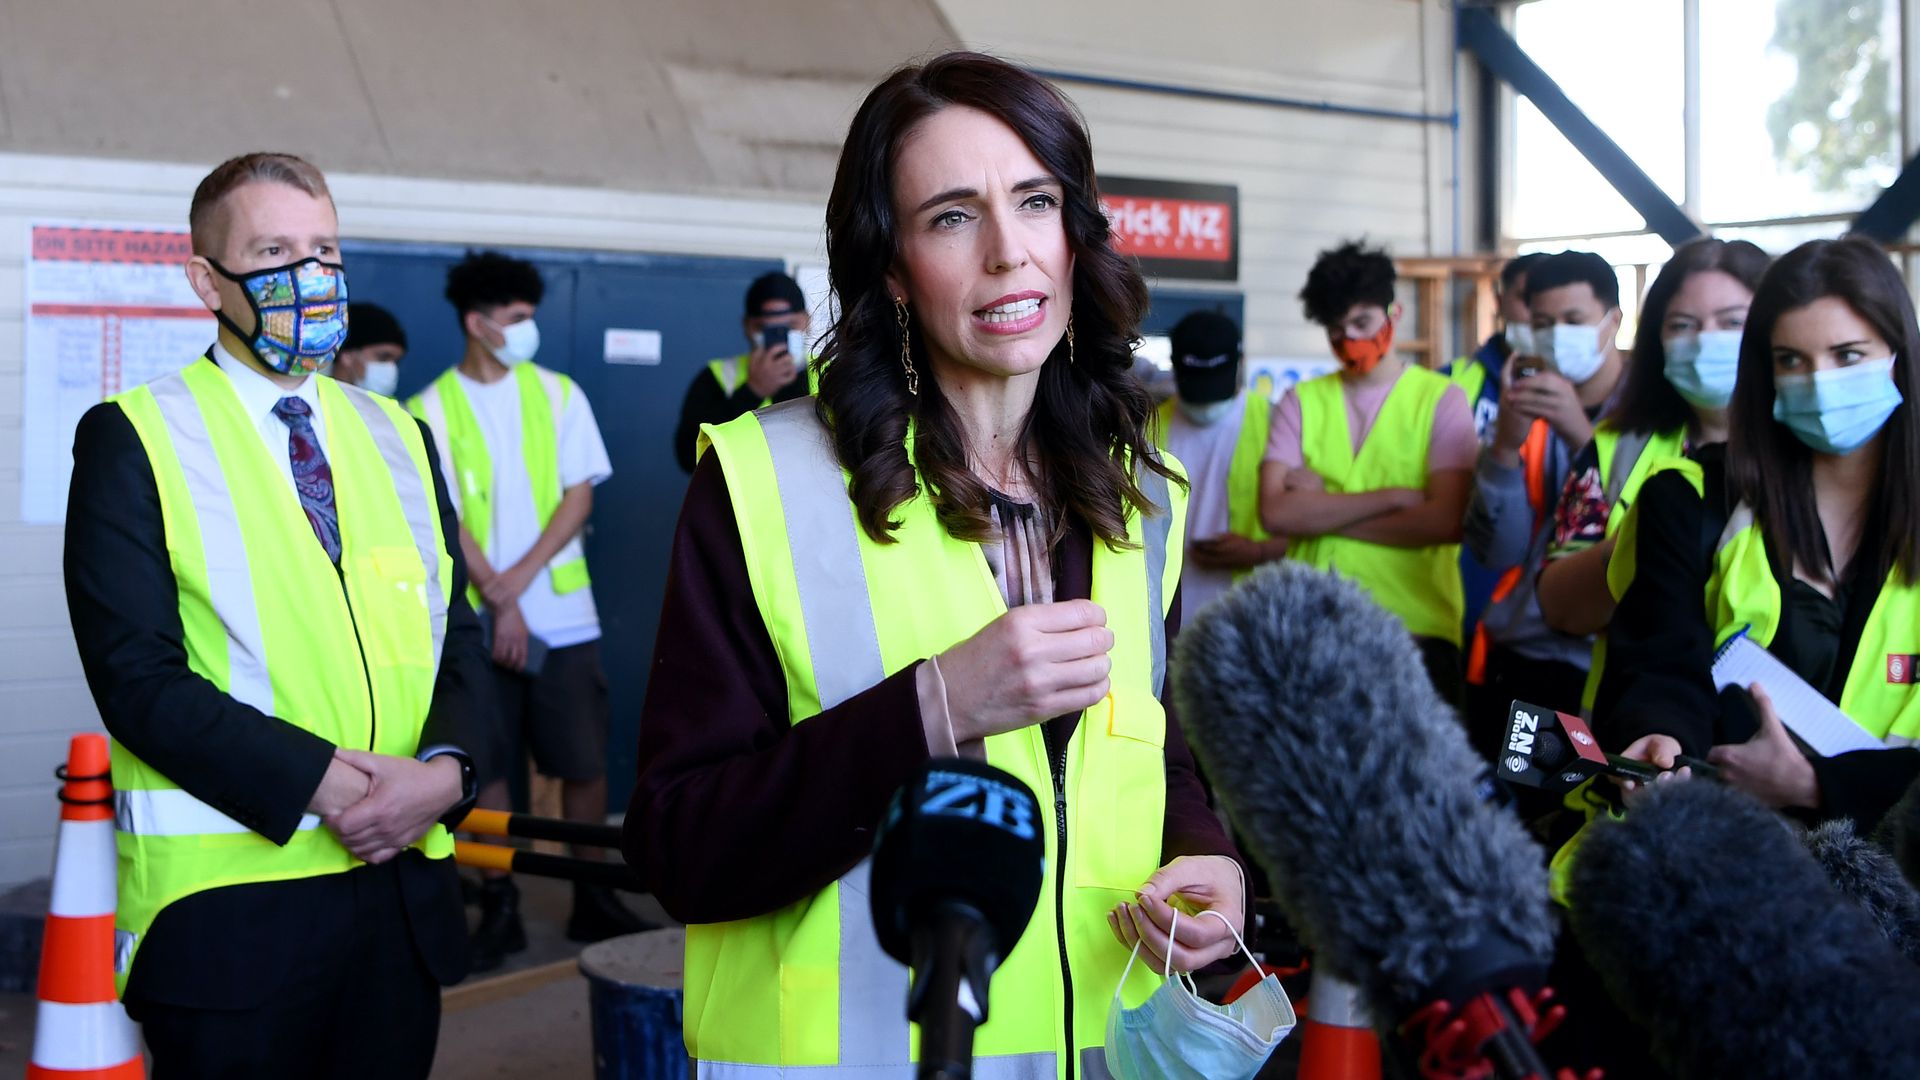  New Zealand Prime Minister Jacinda Ardern answers questions at the Manukau Institute of Technology on September 03, 2020 in Auckland, New Zealand.